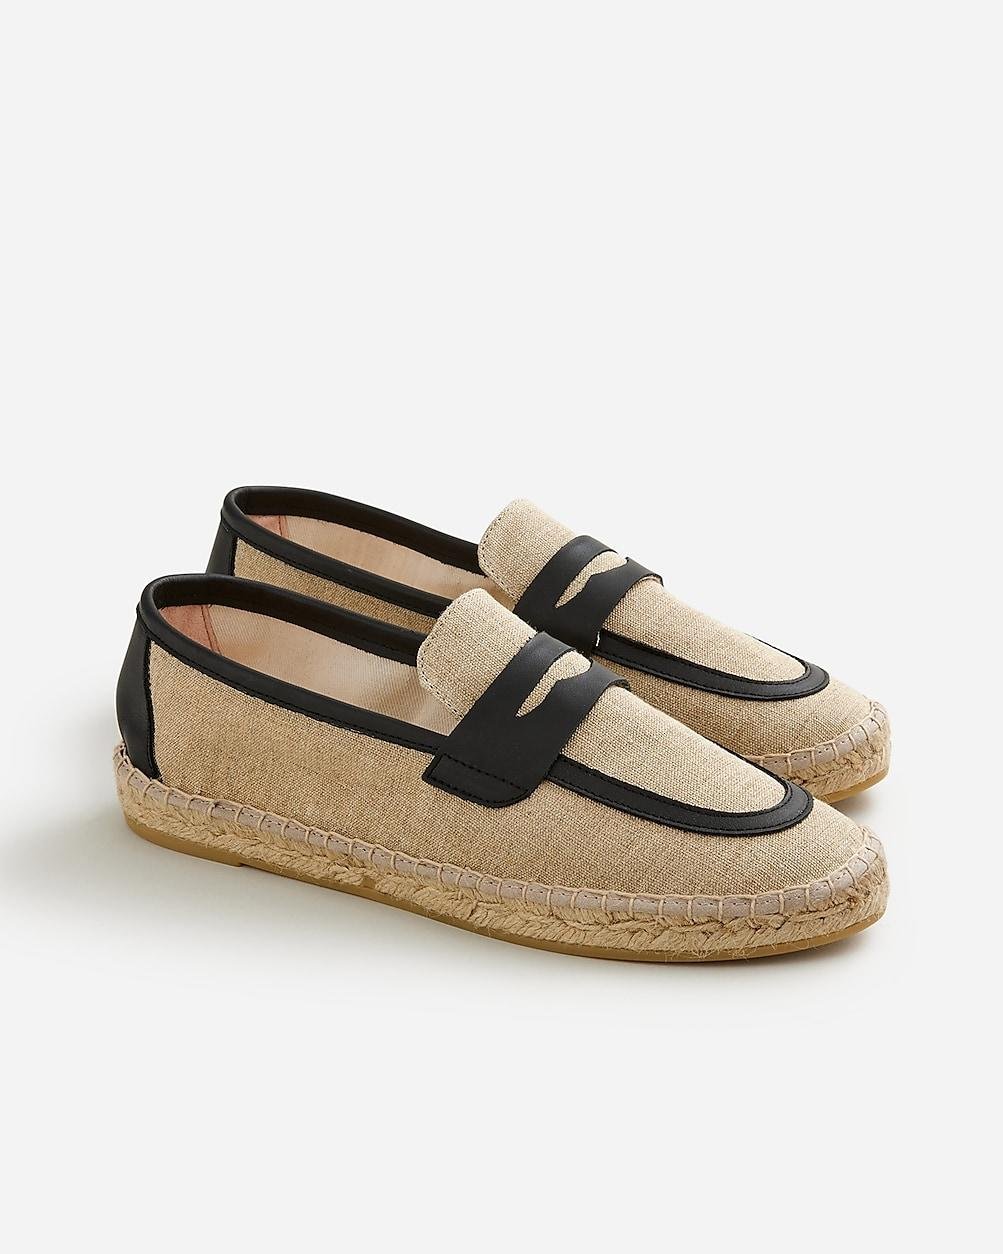 Made-in-Spain loafer espadrilles in linen blend and leather by J.CREW